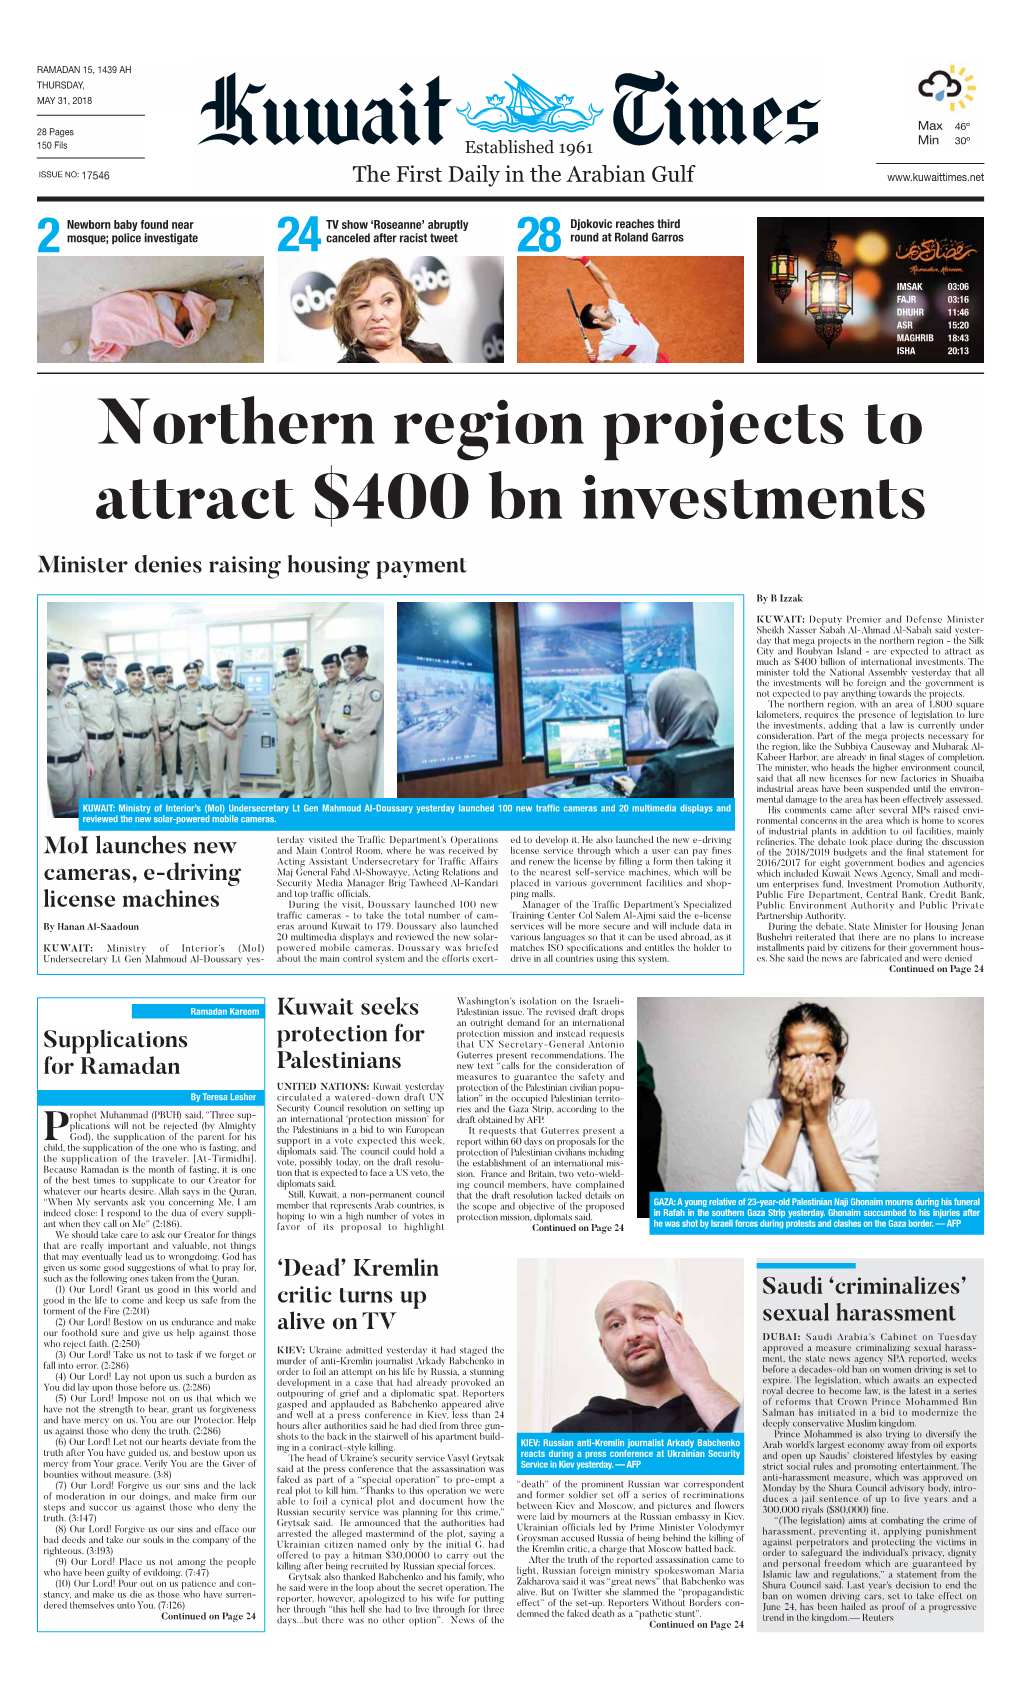 Northern Region Projects to Attract $400 Bn Investments Minister Denies Raising Housing Payment